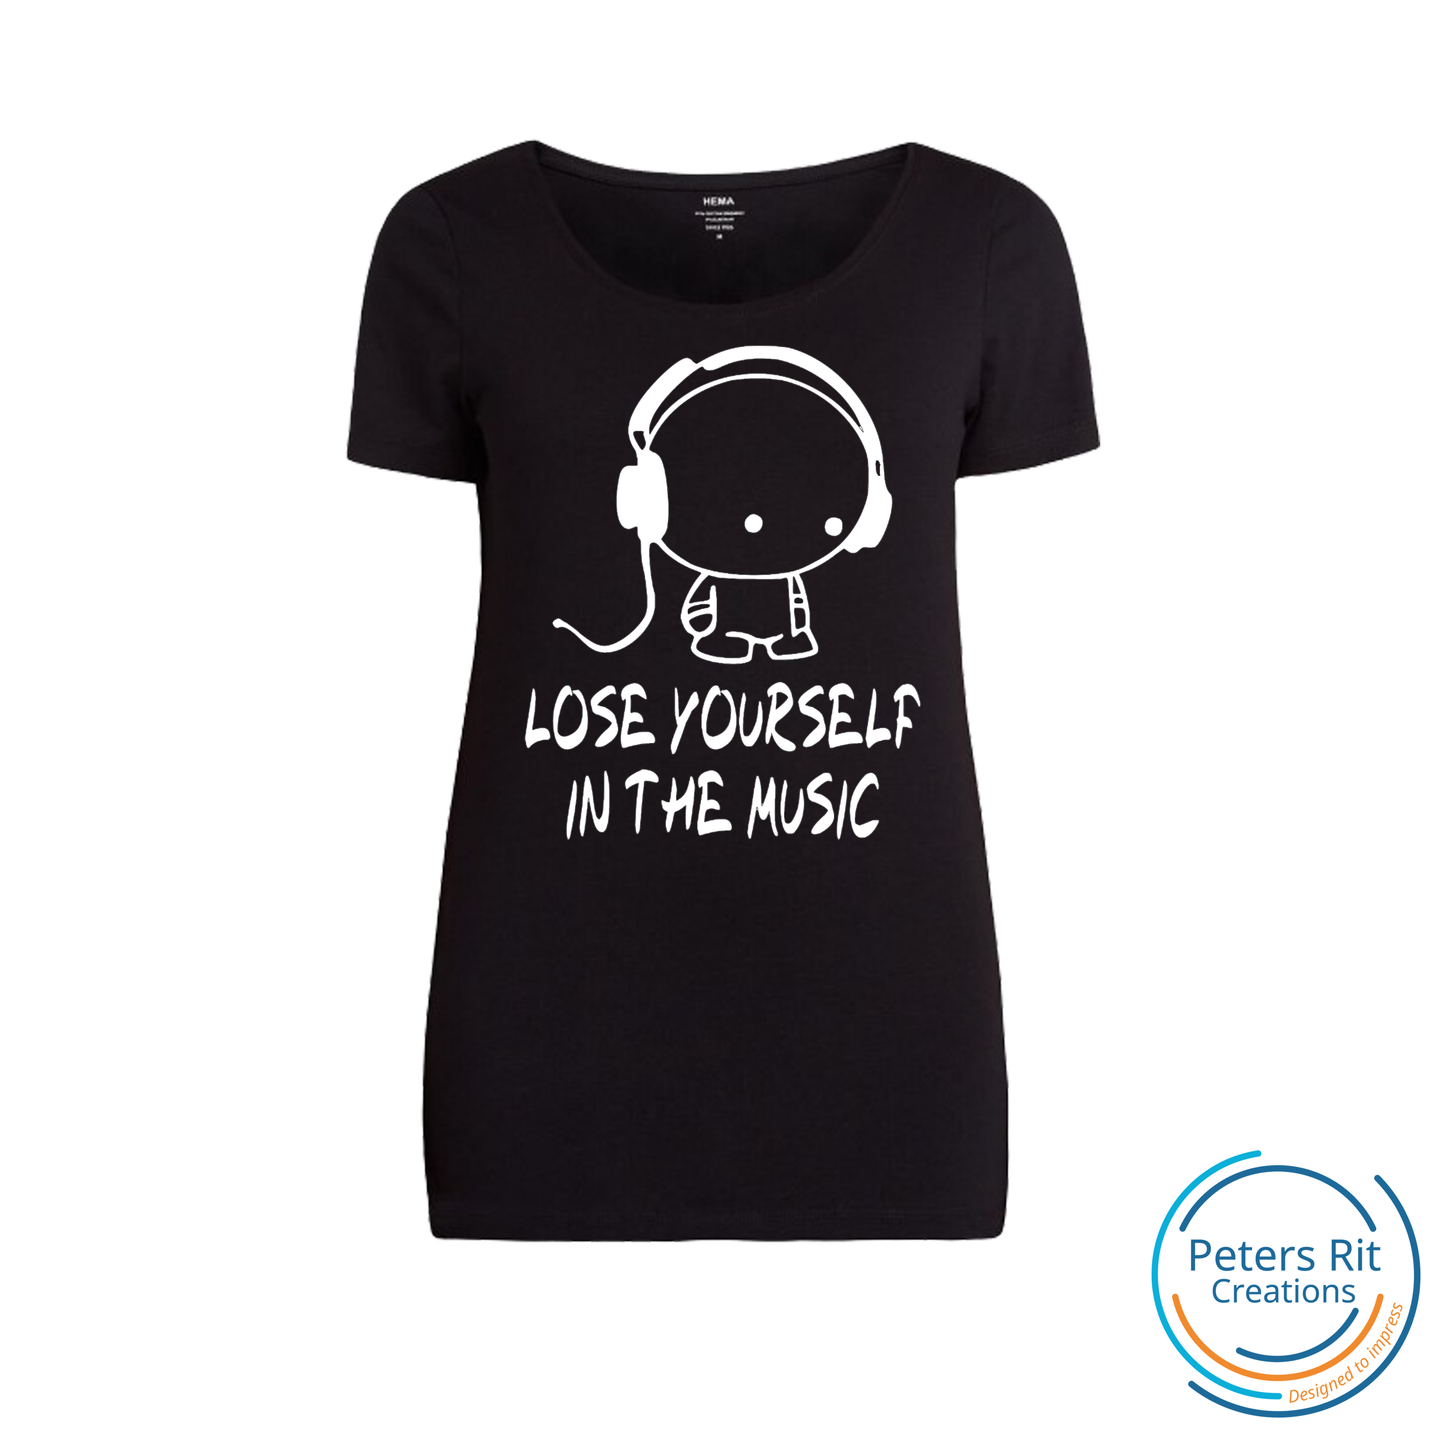 Dames T-shirt R-hals korte mouwen | LOSE YOURSELF IN THE MUSIC